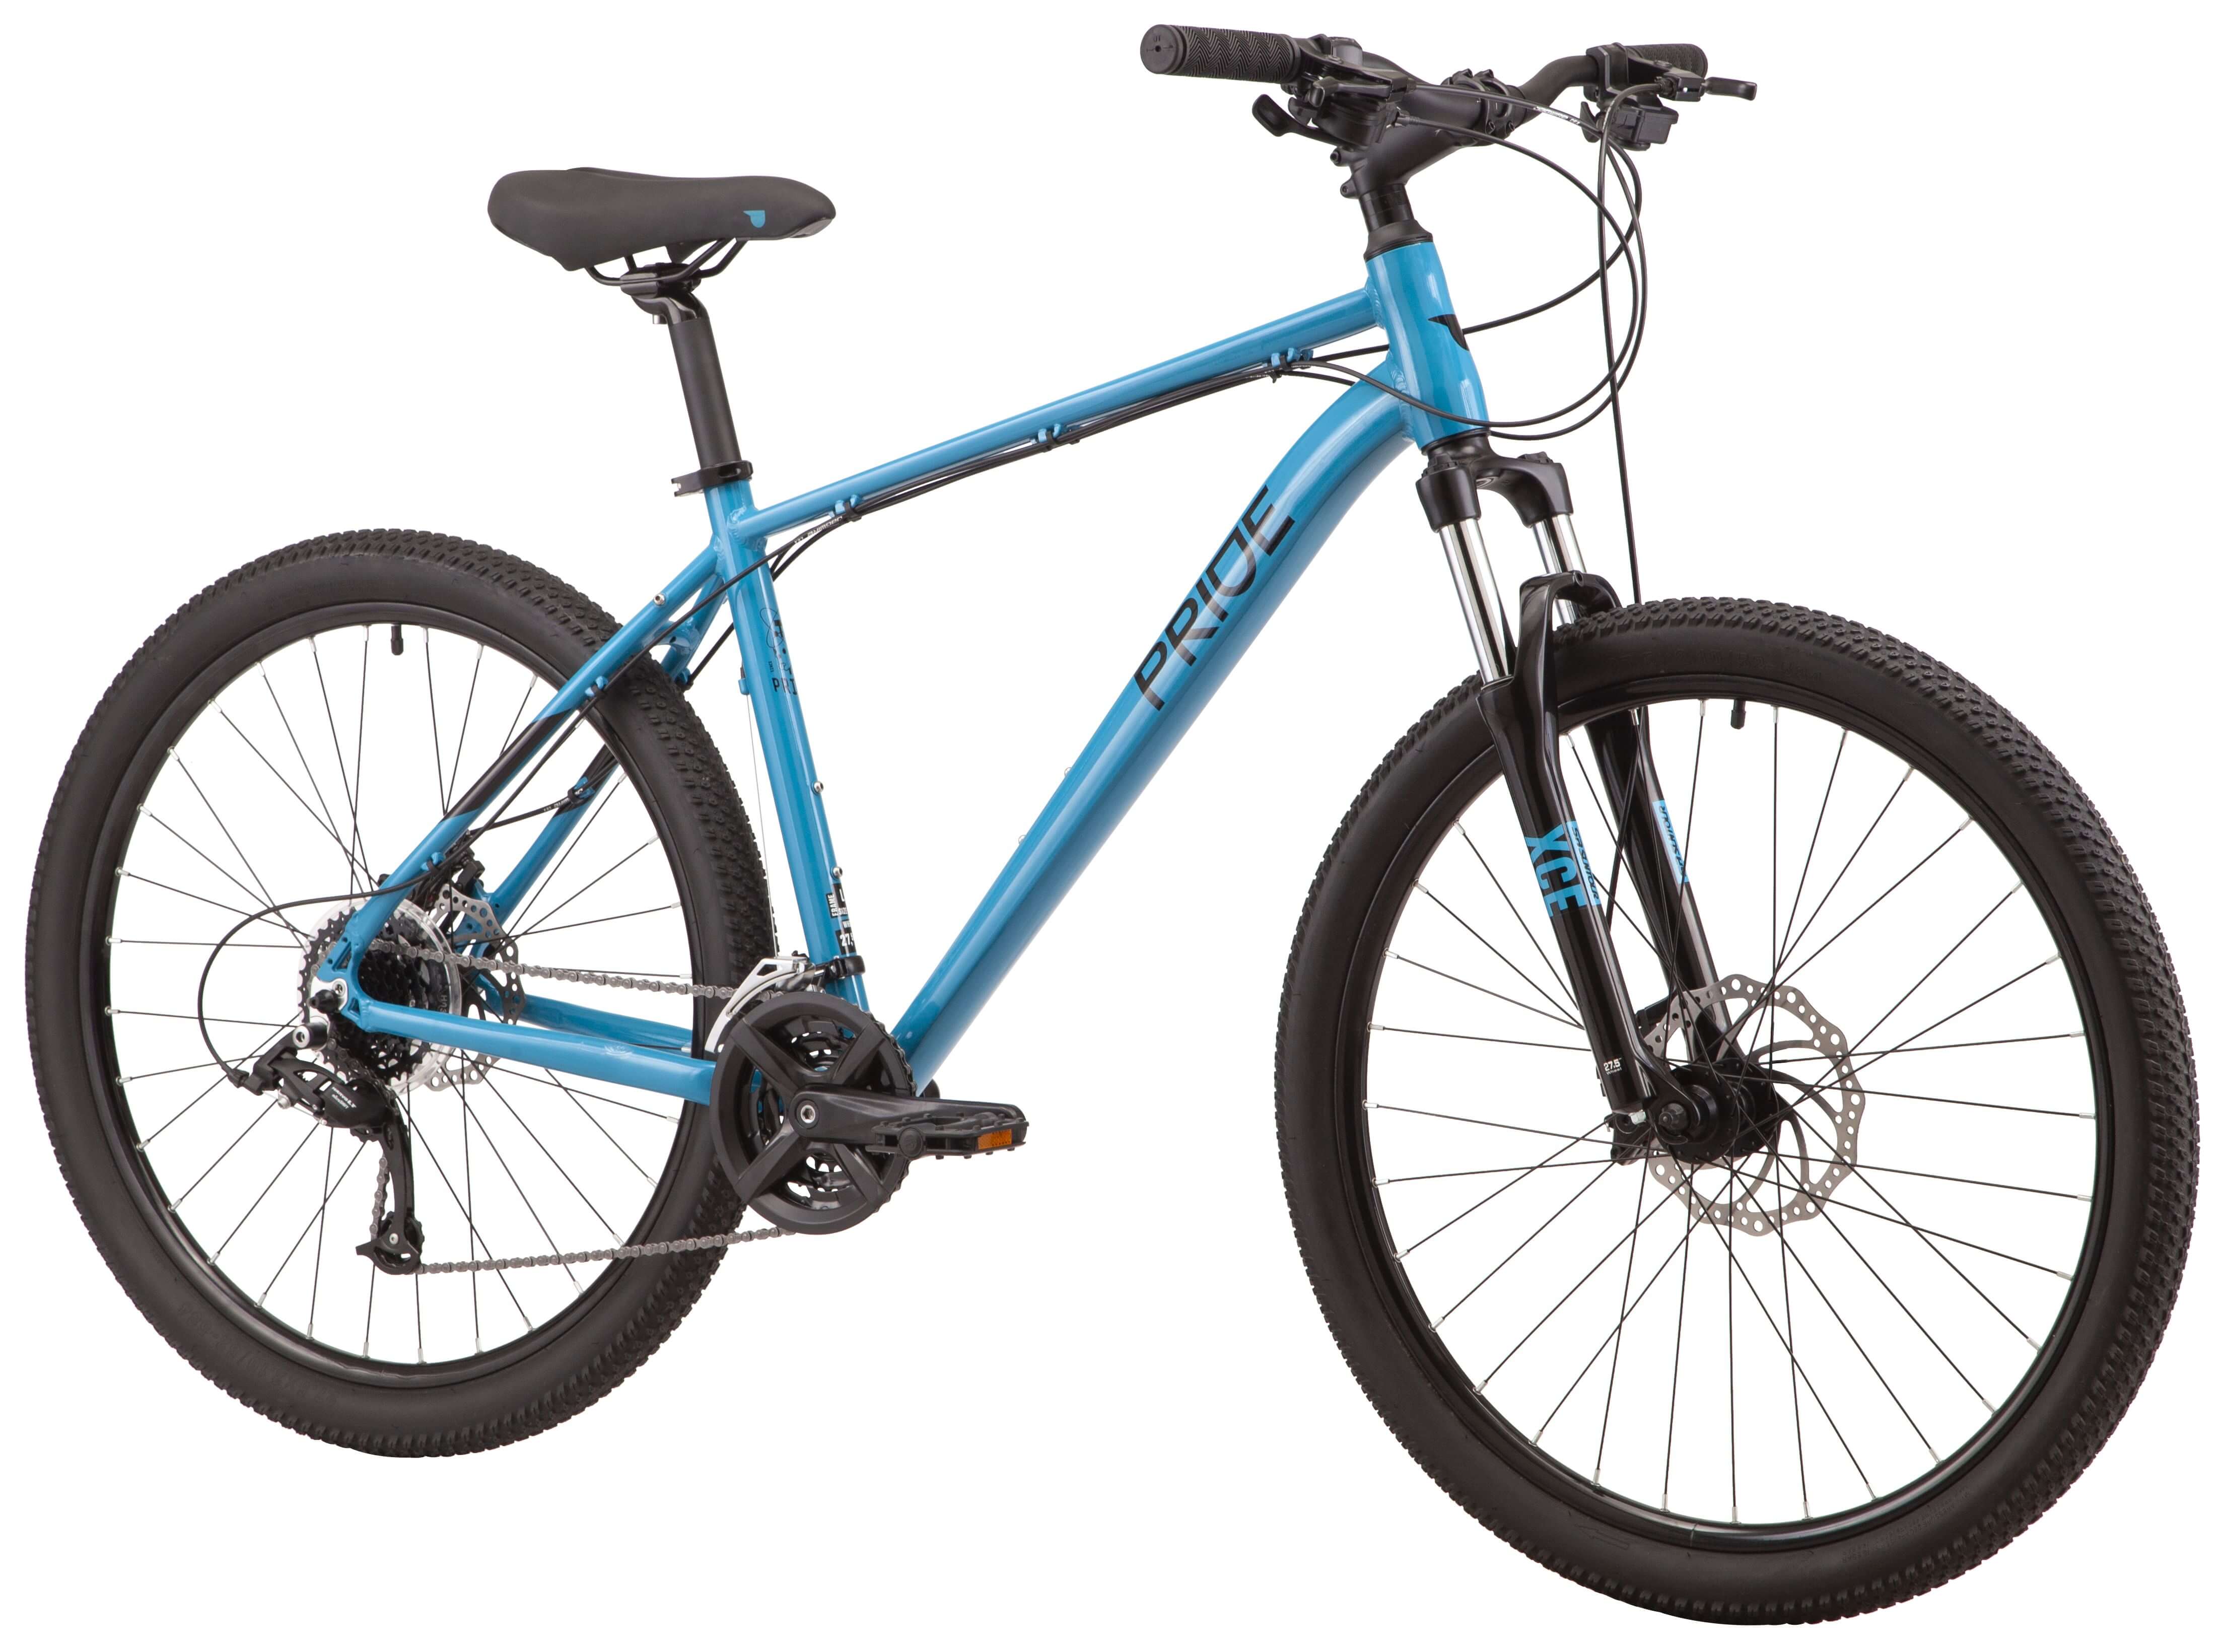 27.5" PRIDE MARVEL 7.2 frame - M 2022 turquoise (rear and front switches and tamnet - Microshift) Photo 2